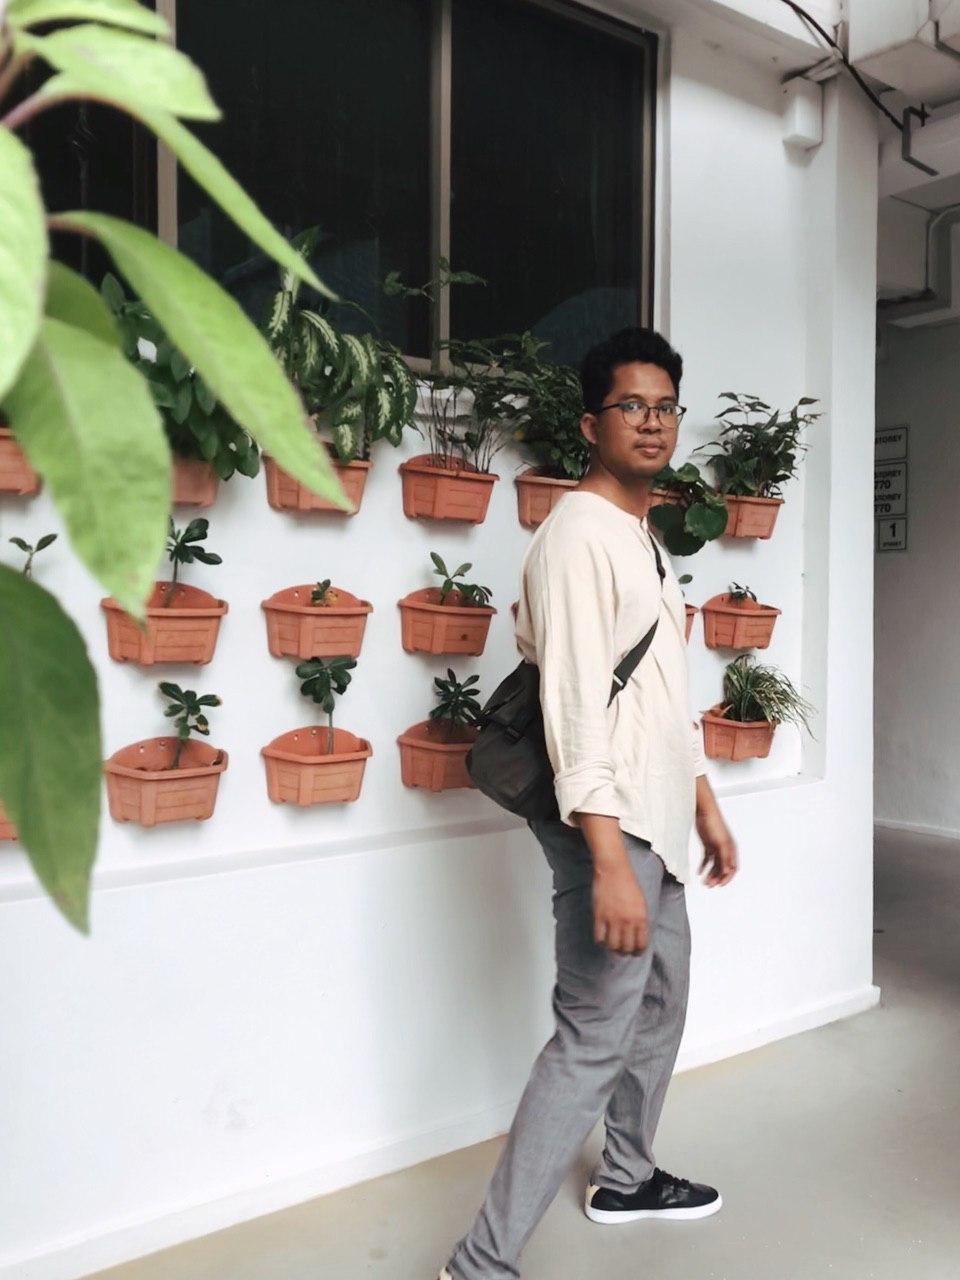 Photo of him walking in a corridor with hanging plants.